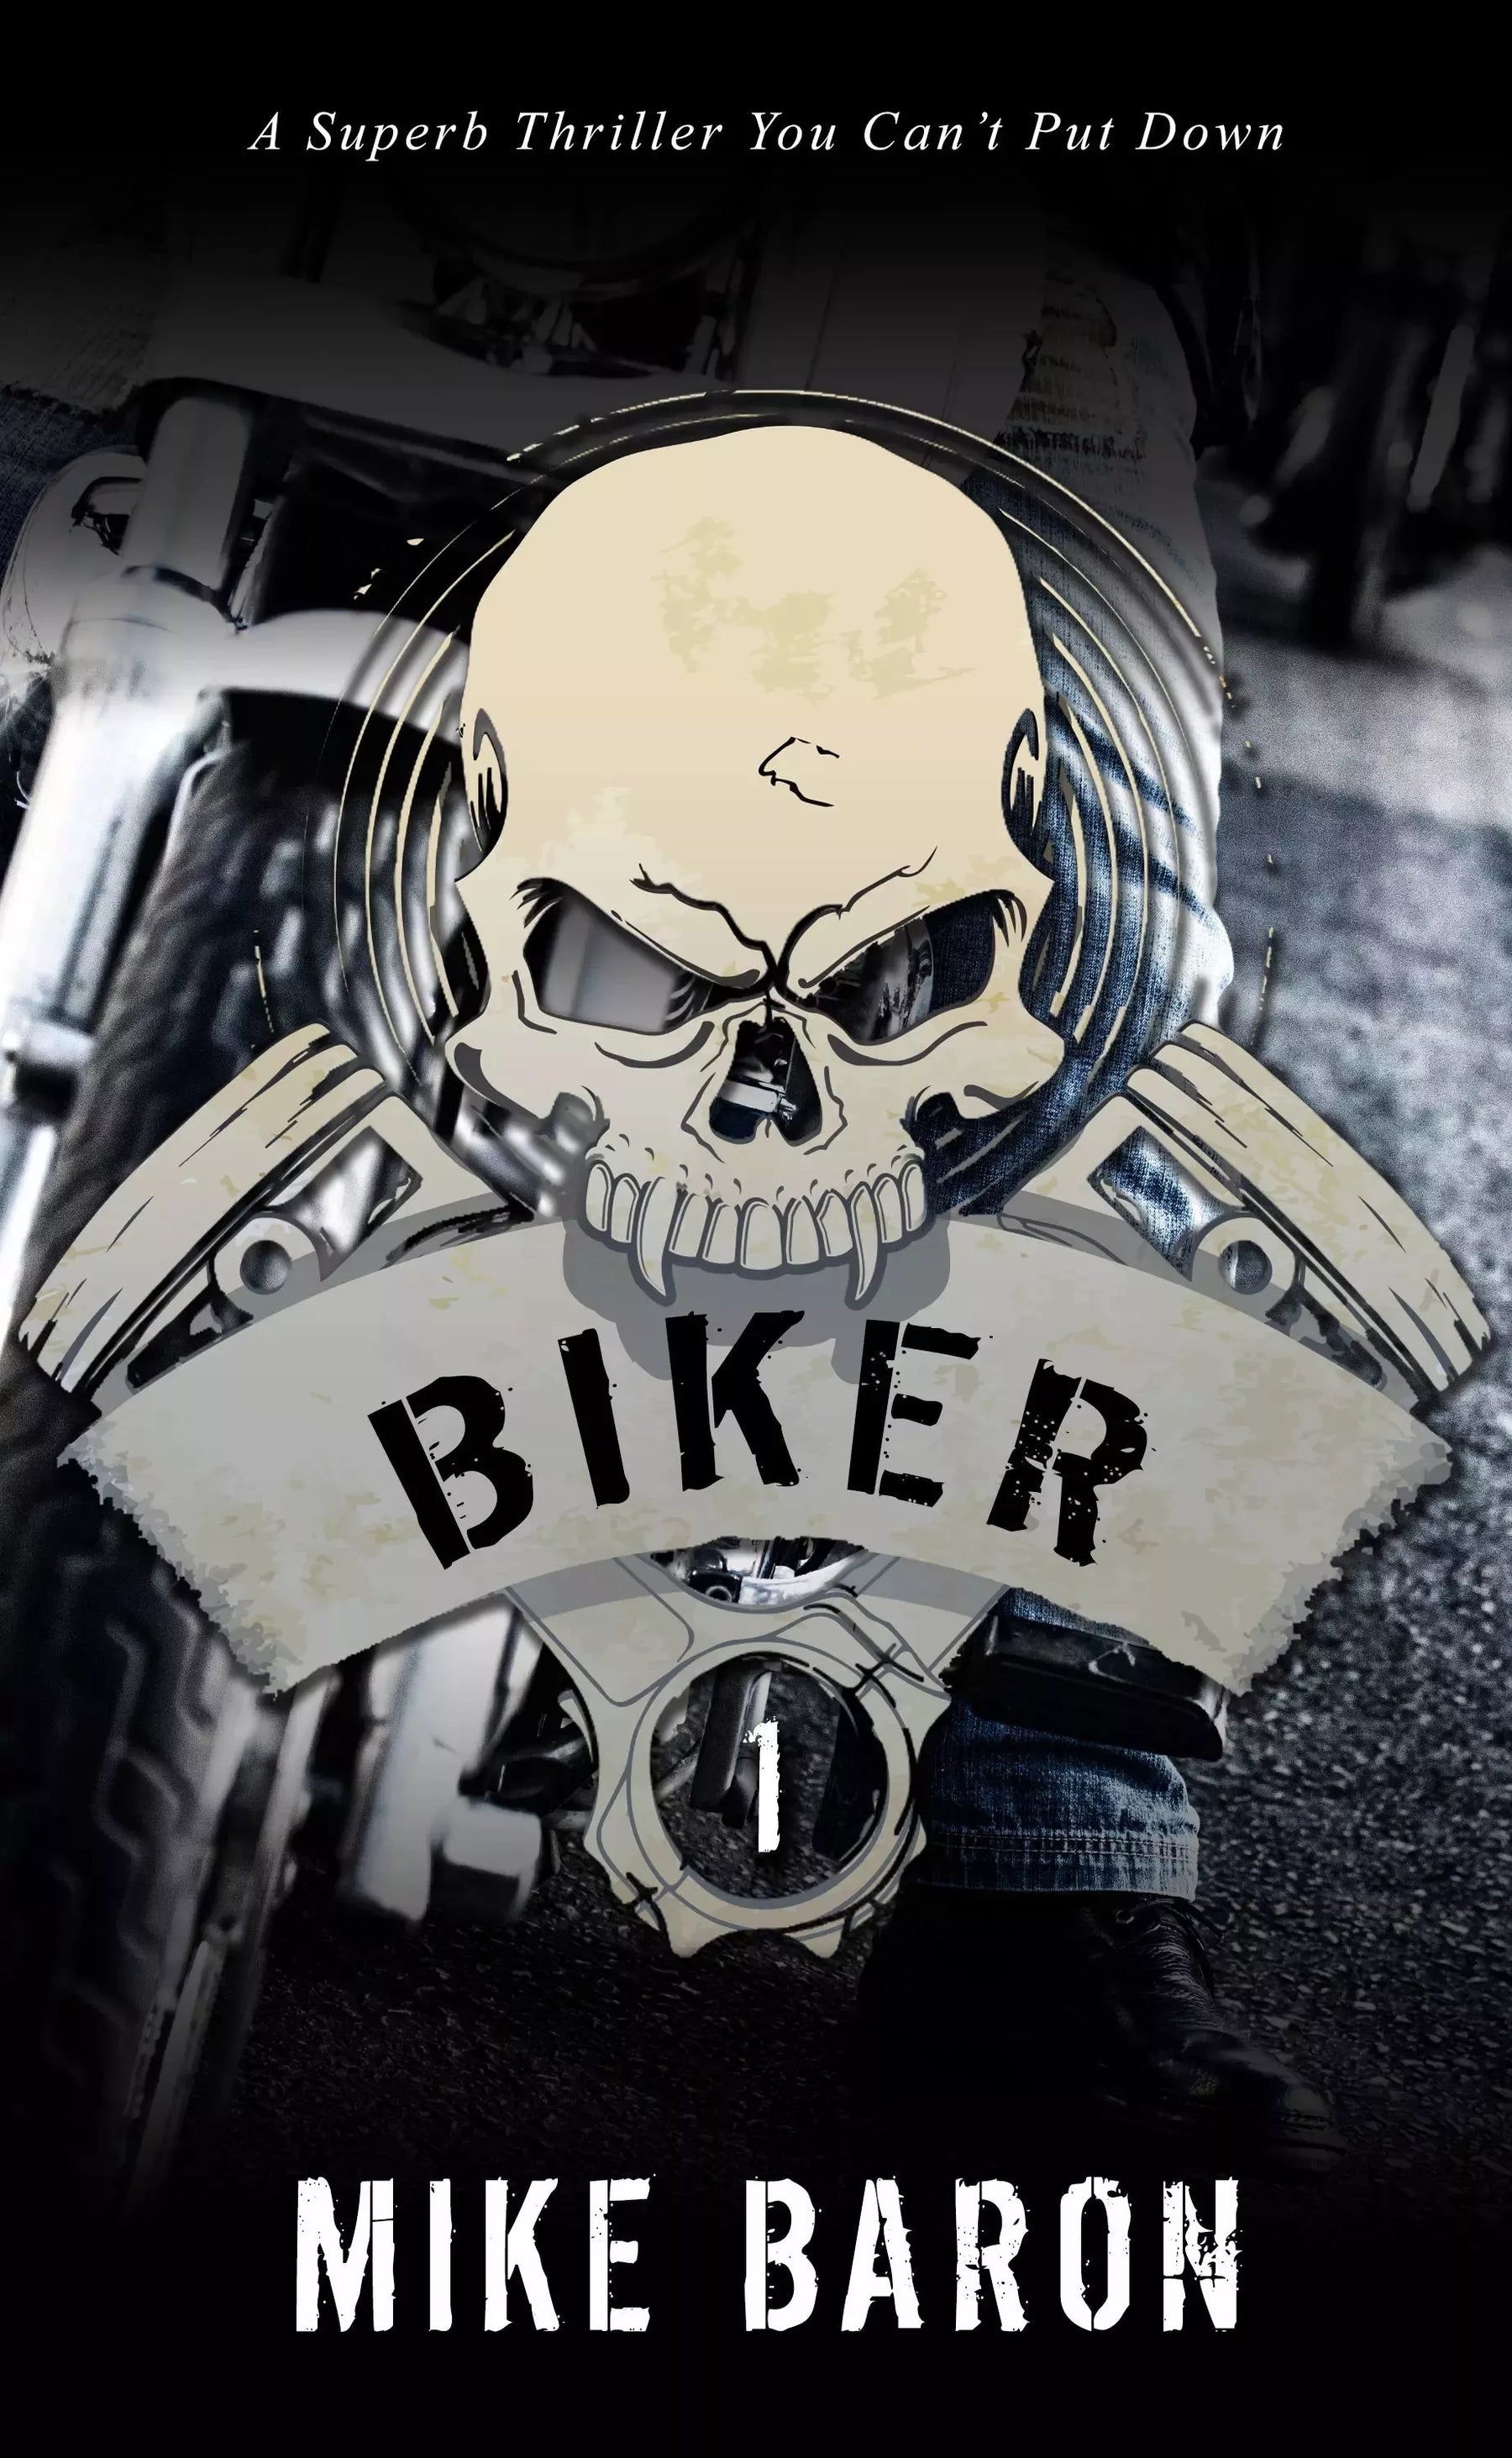 Mike Baron’s Acclaimed ‘Biker’ Series to be Developed for the Silver Screen